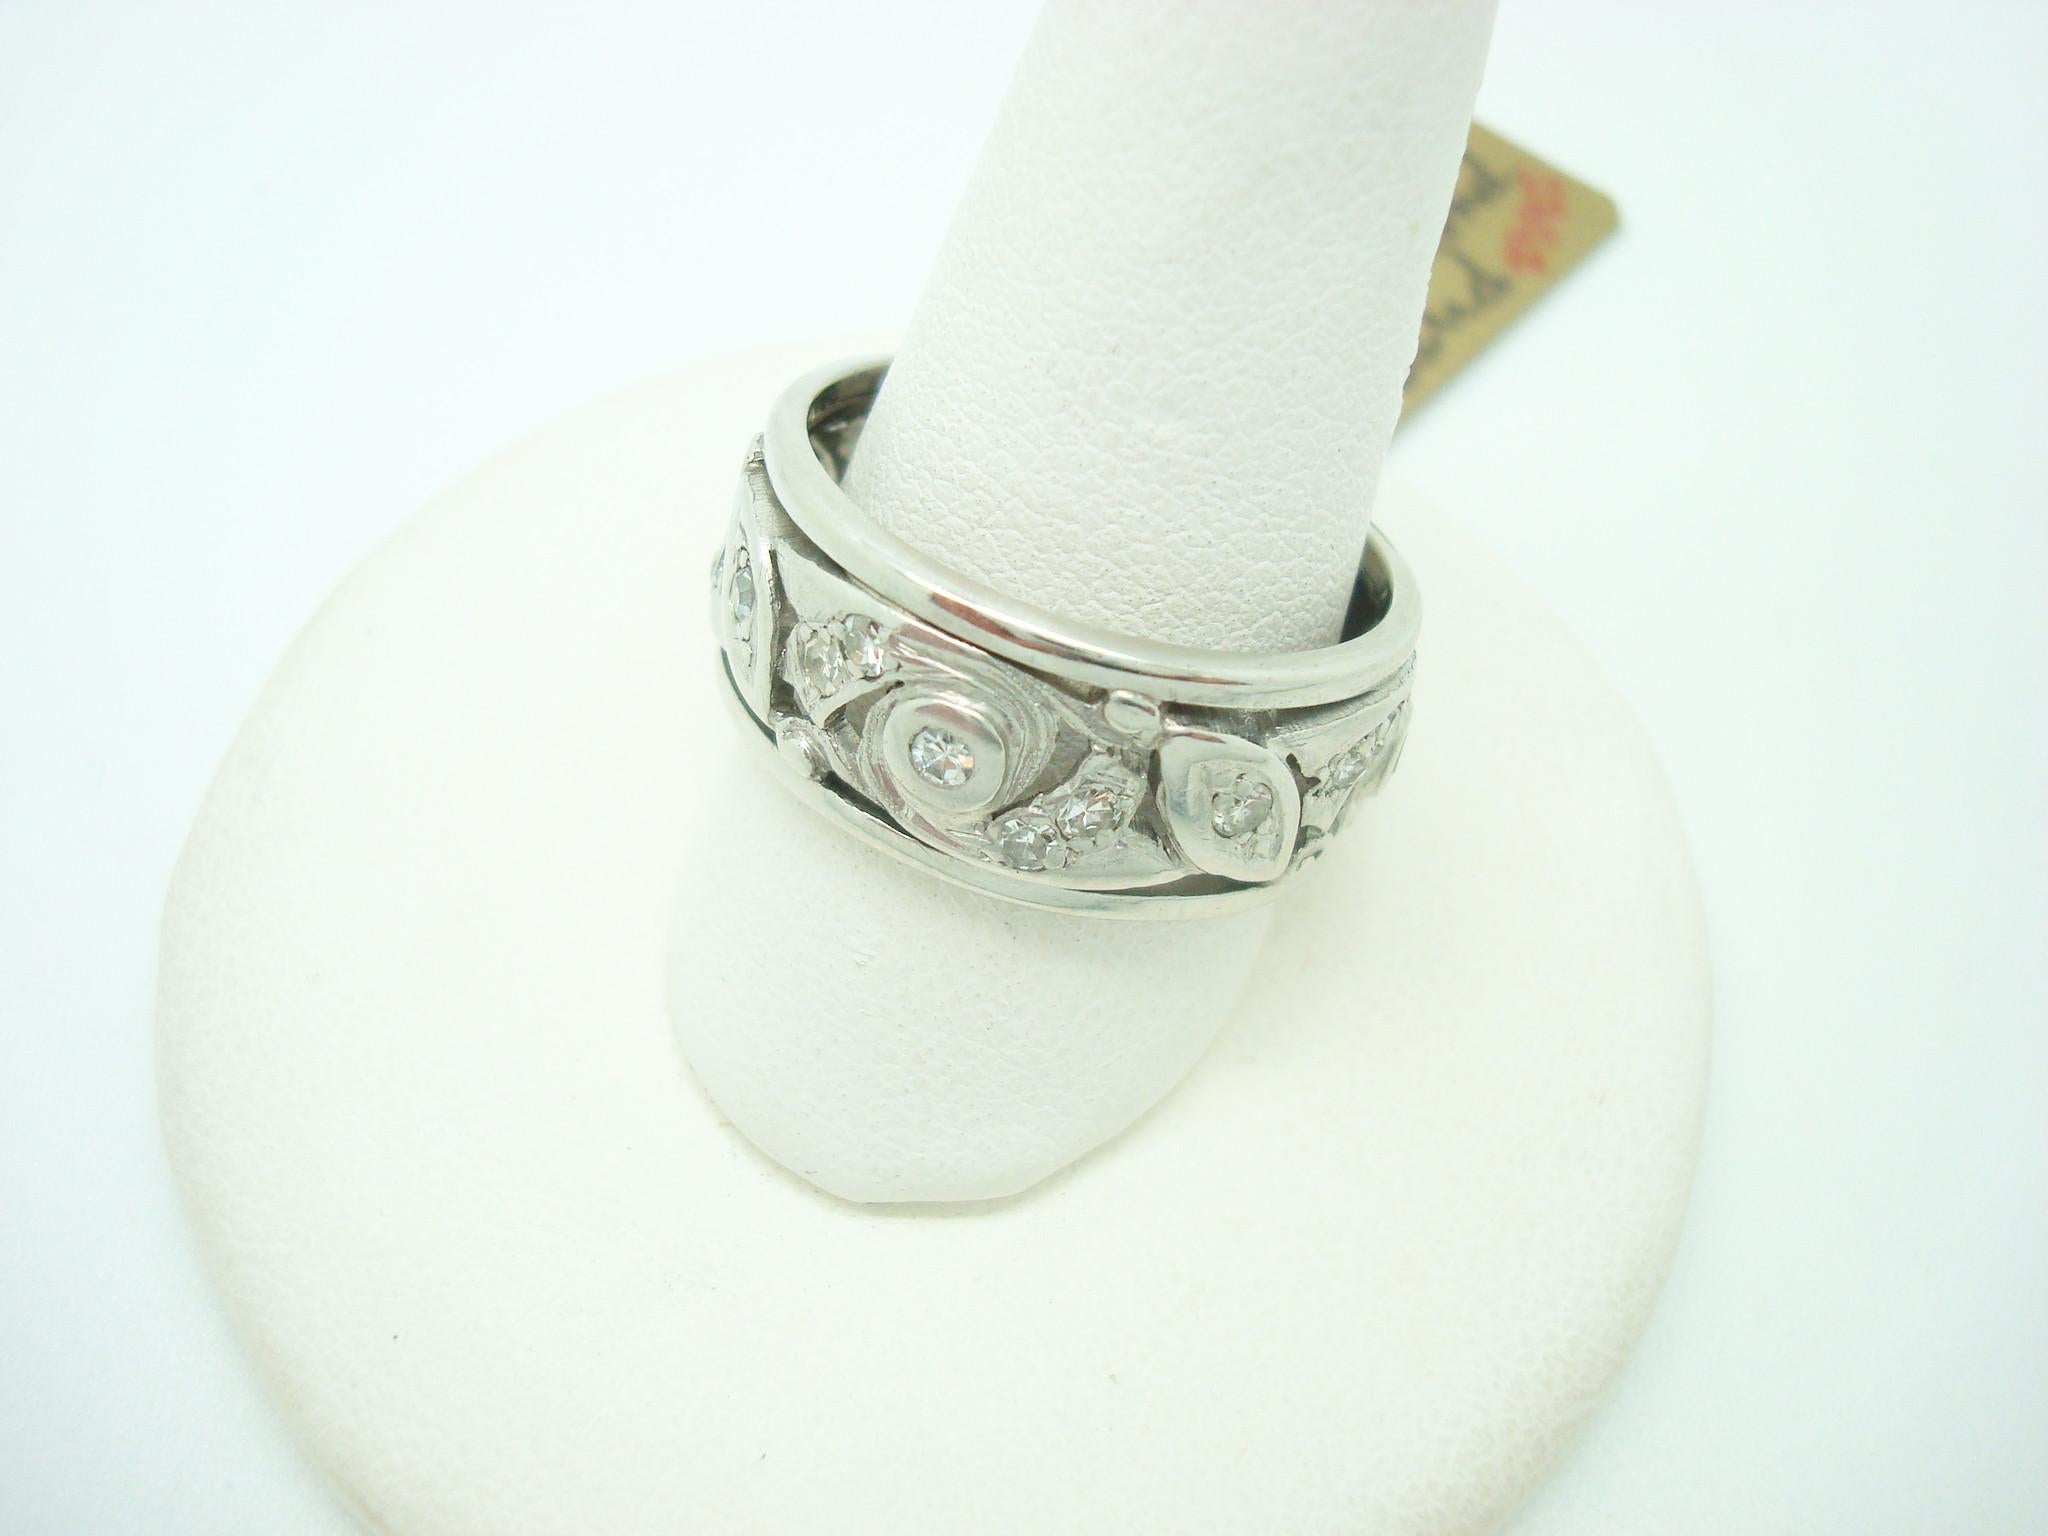 Pierced Art Deco Platinum Genuine Natural Diamond Band Ring (#J2385)

Charming platinum diamond ring band in a lovely pierced Art Deco. Set in the wide band are dazzling small round diamonds, and they measure 1.5mm. The ring fits a 6 1/2 finger, and